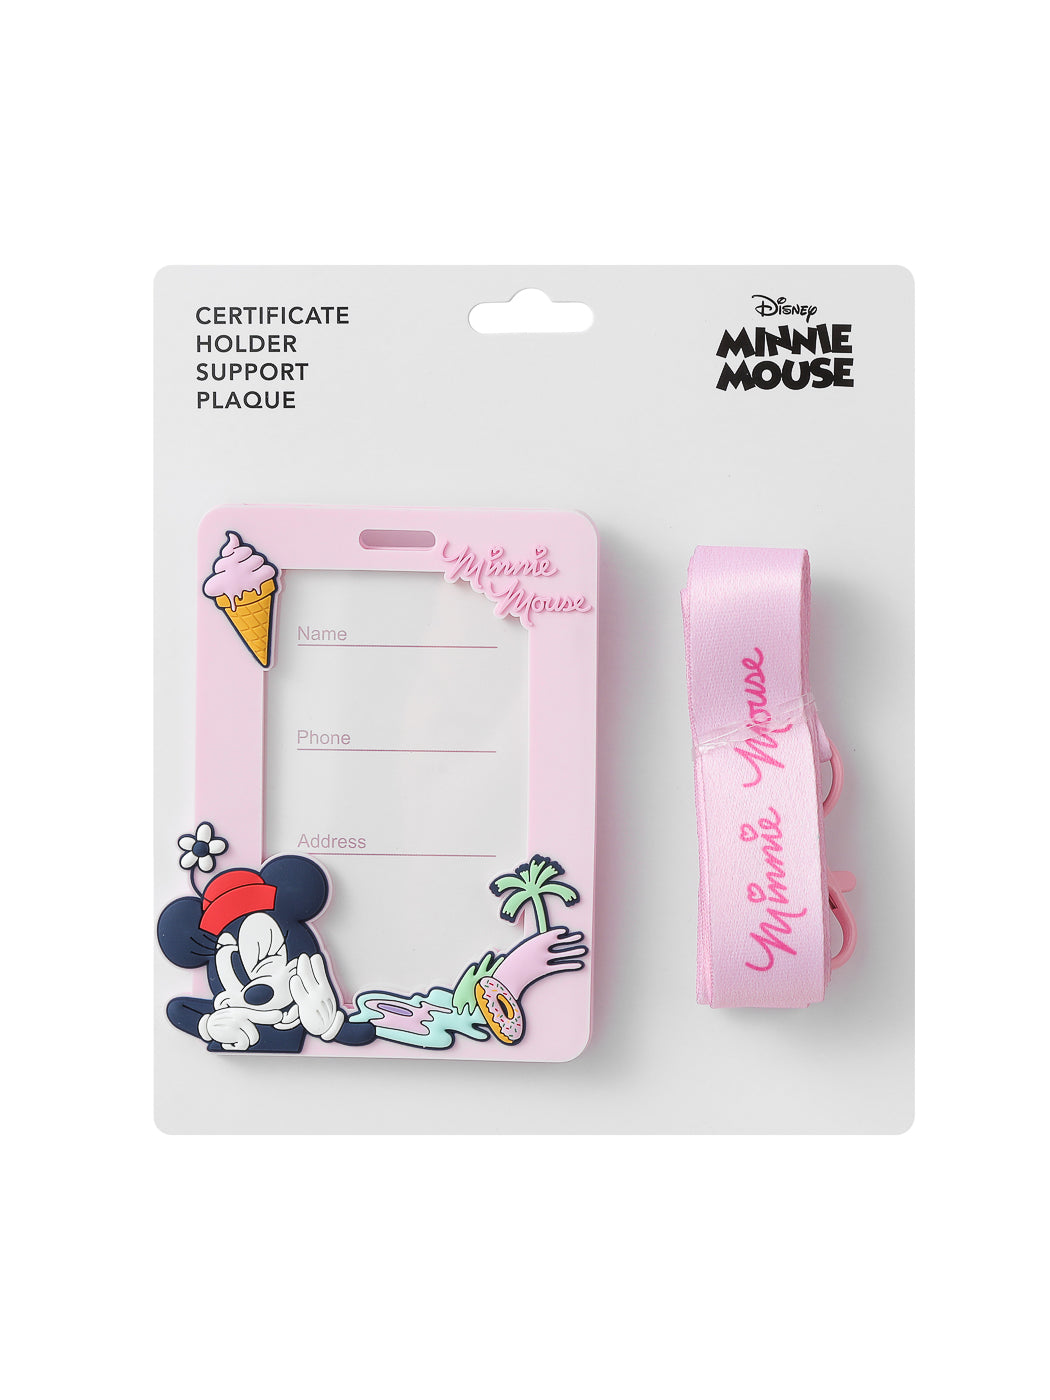 MINISO MICKEY MOUSE COLLECTION 2.0 NECK-HANGING CERTIFICATE HOLDER(MINNIE MOUSE) 2010516611100 TRAVEL ACCESSORIES